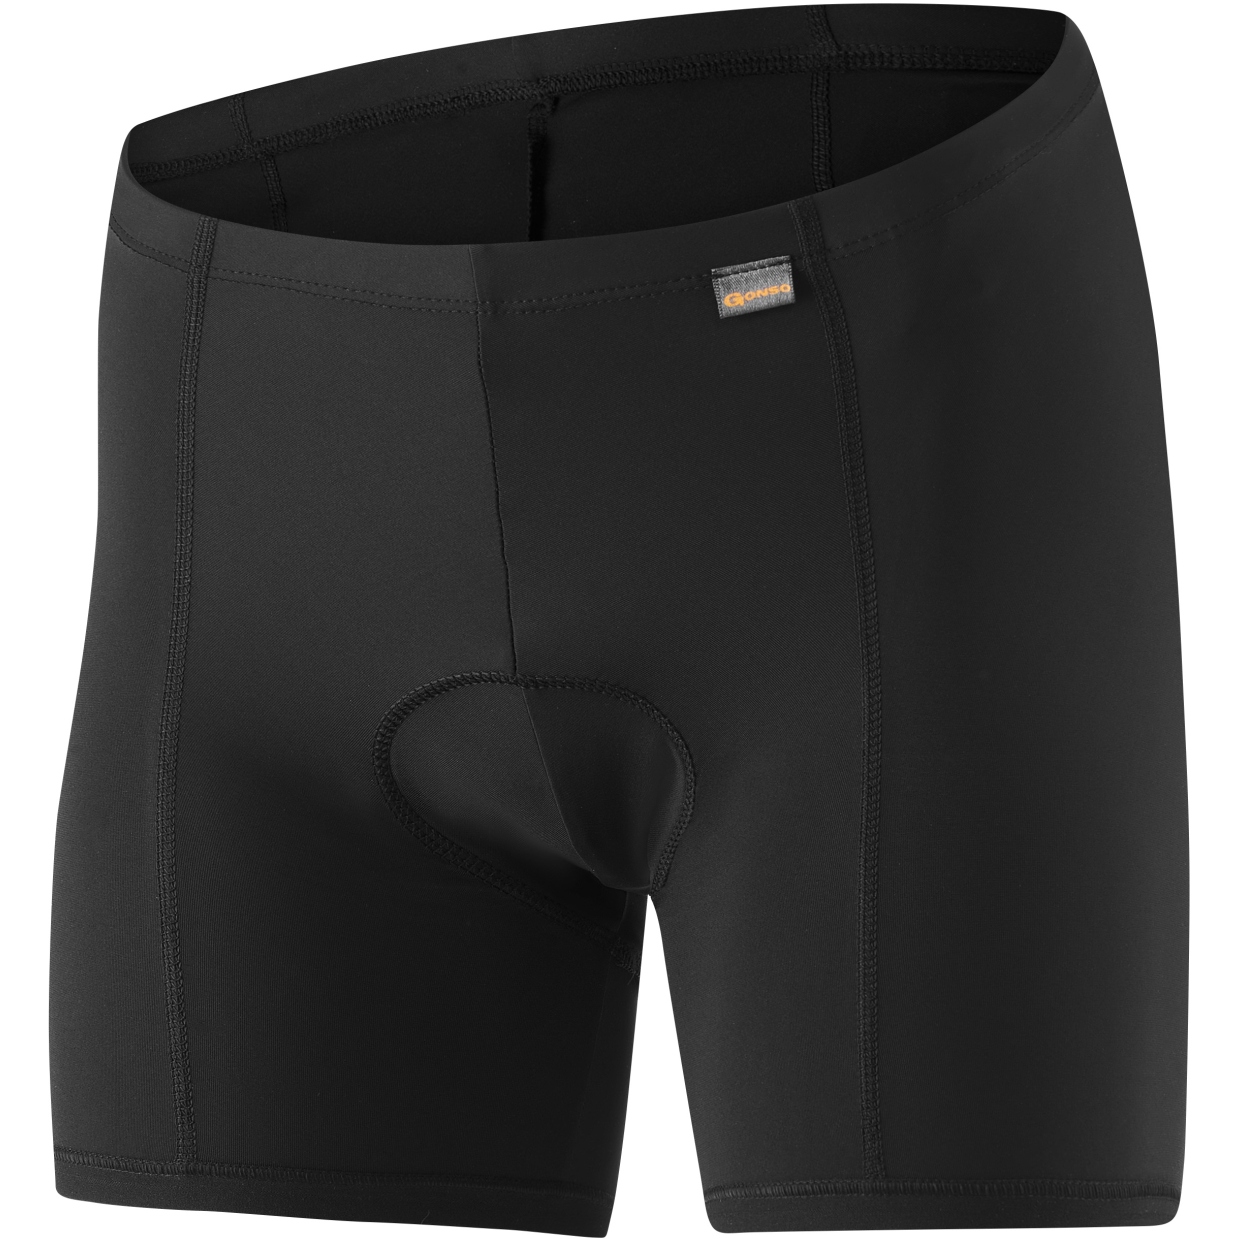 Picture of Gonso Base Bike Underpants Women - Black